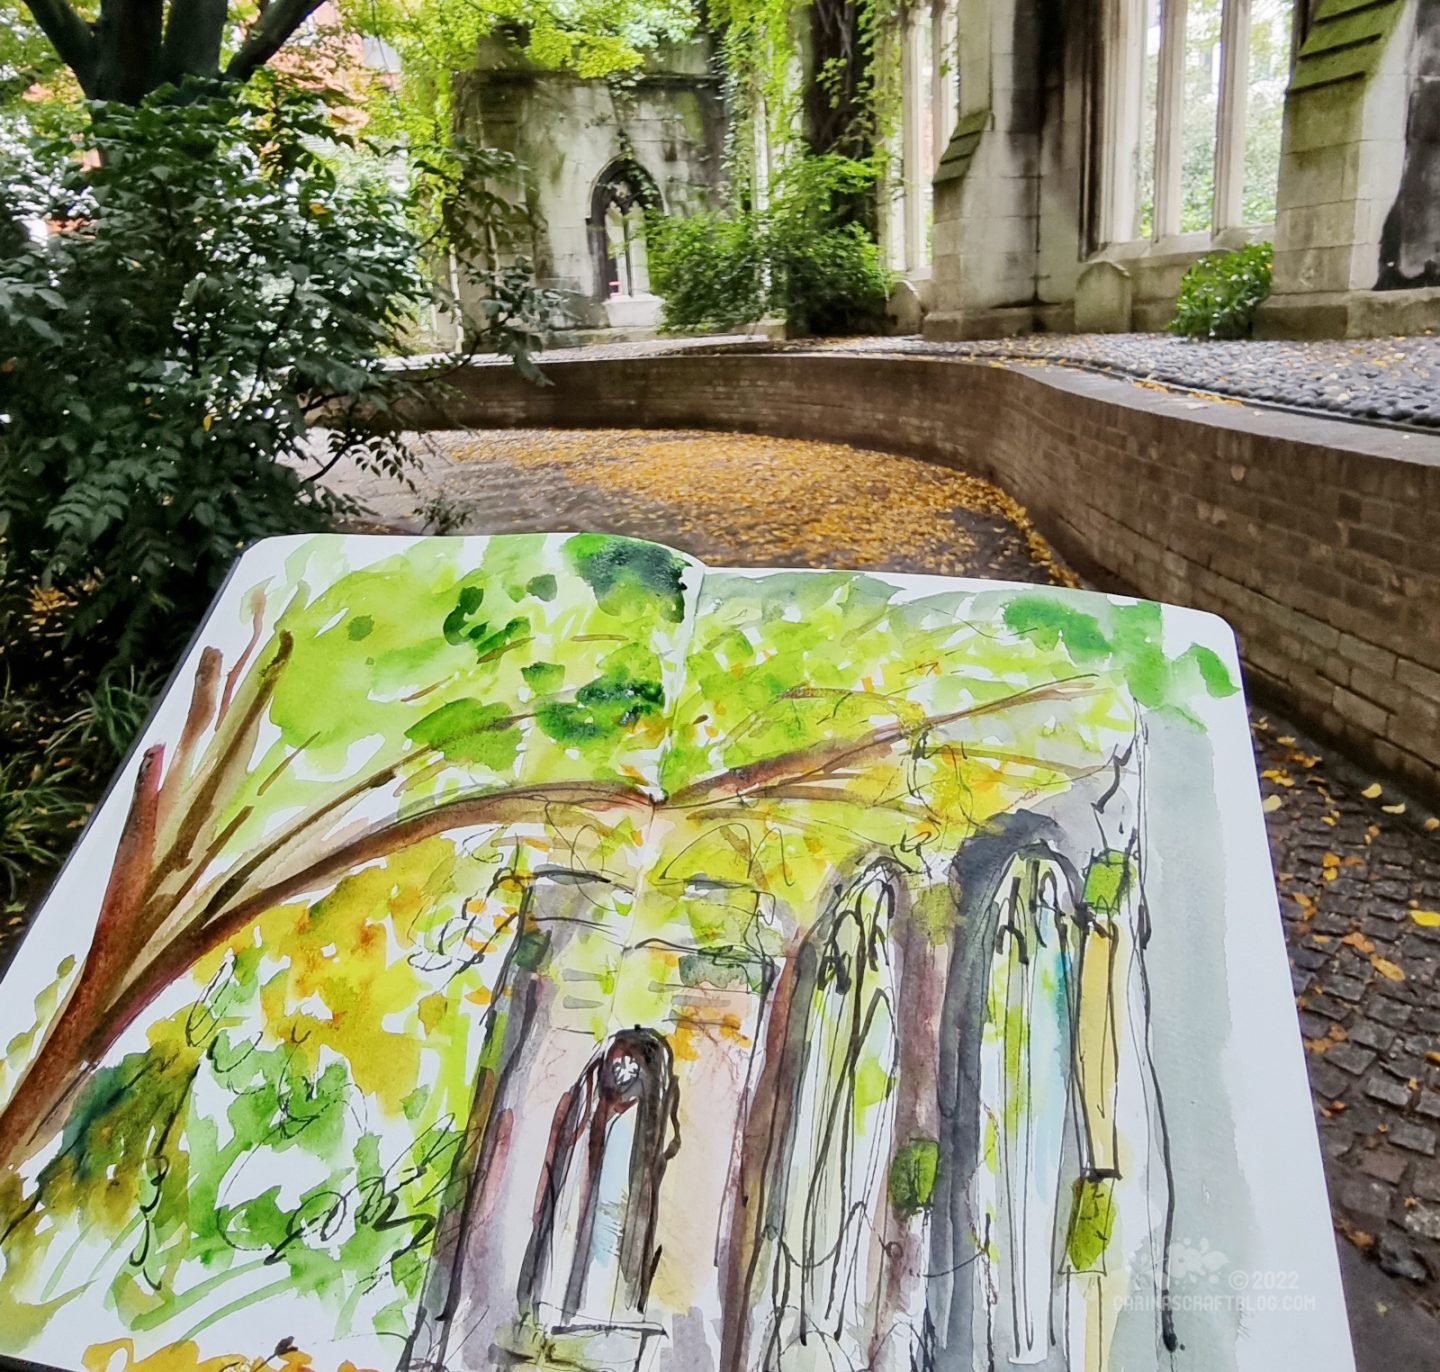 An open sketchbook held up in front of the subject on the pages: the ruins of a church overgrown with plants.